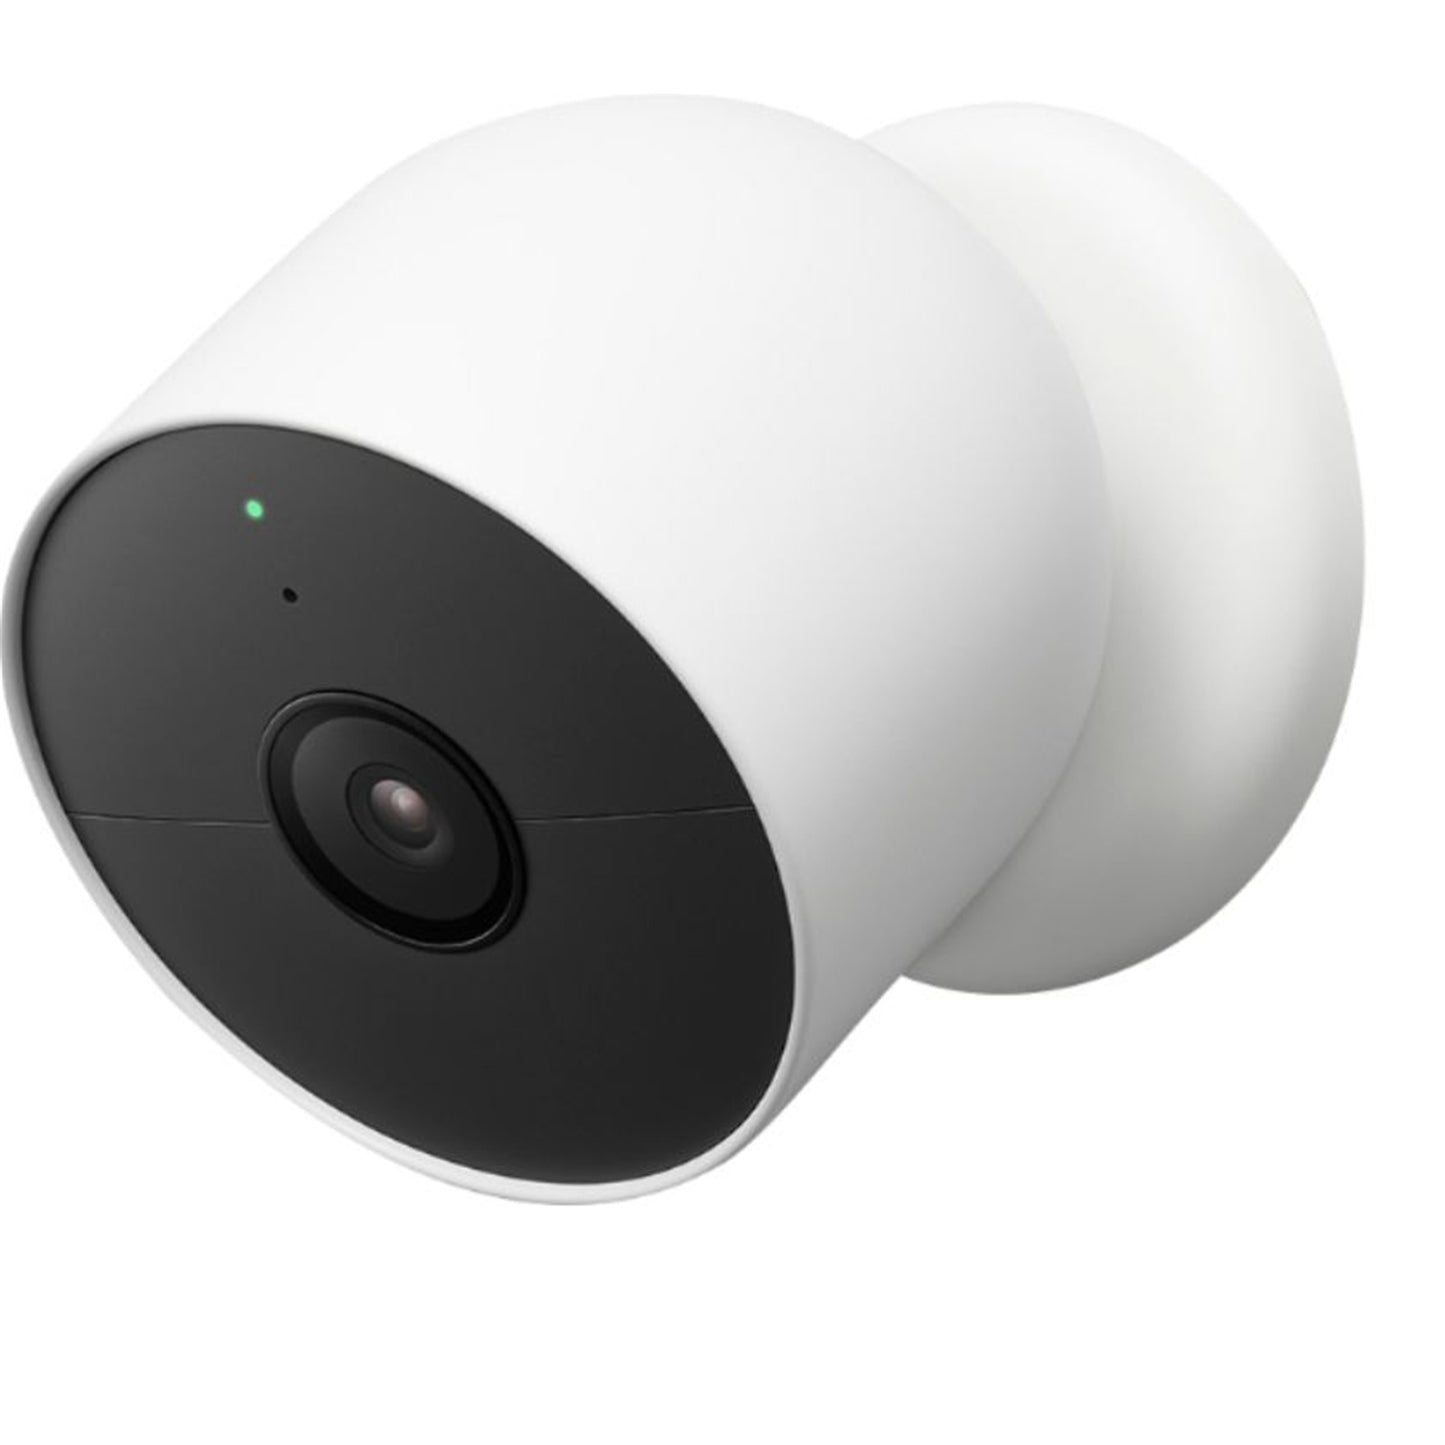 Google Nest Wire-Free Battery Cam - 3 Pack